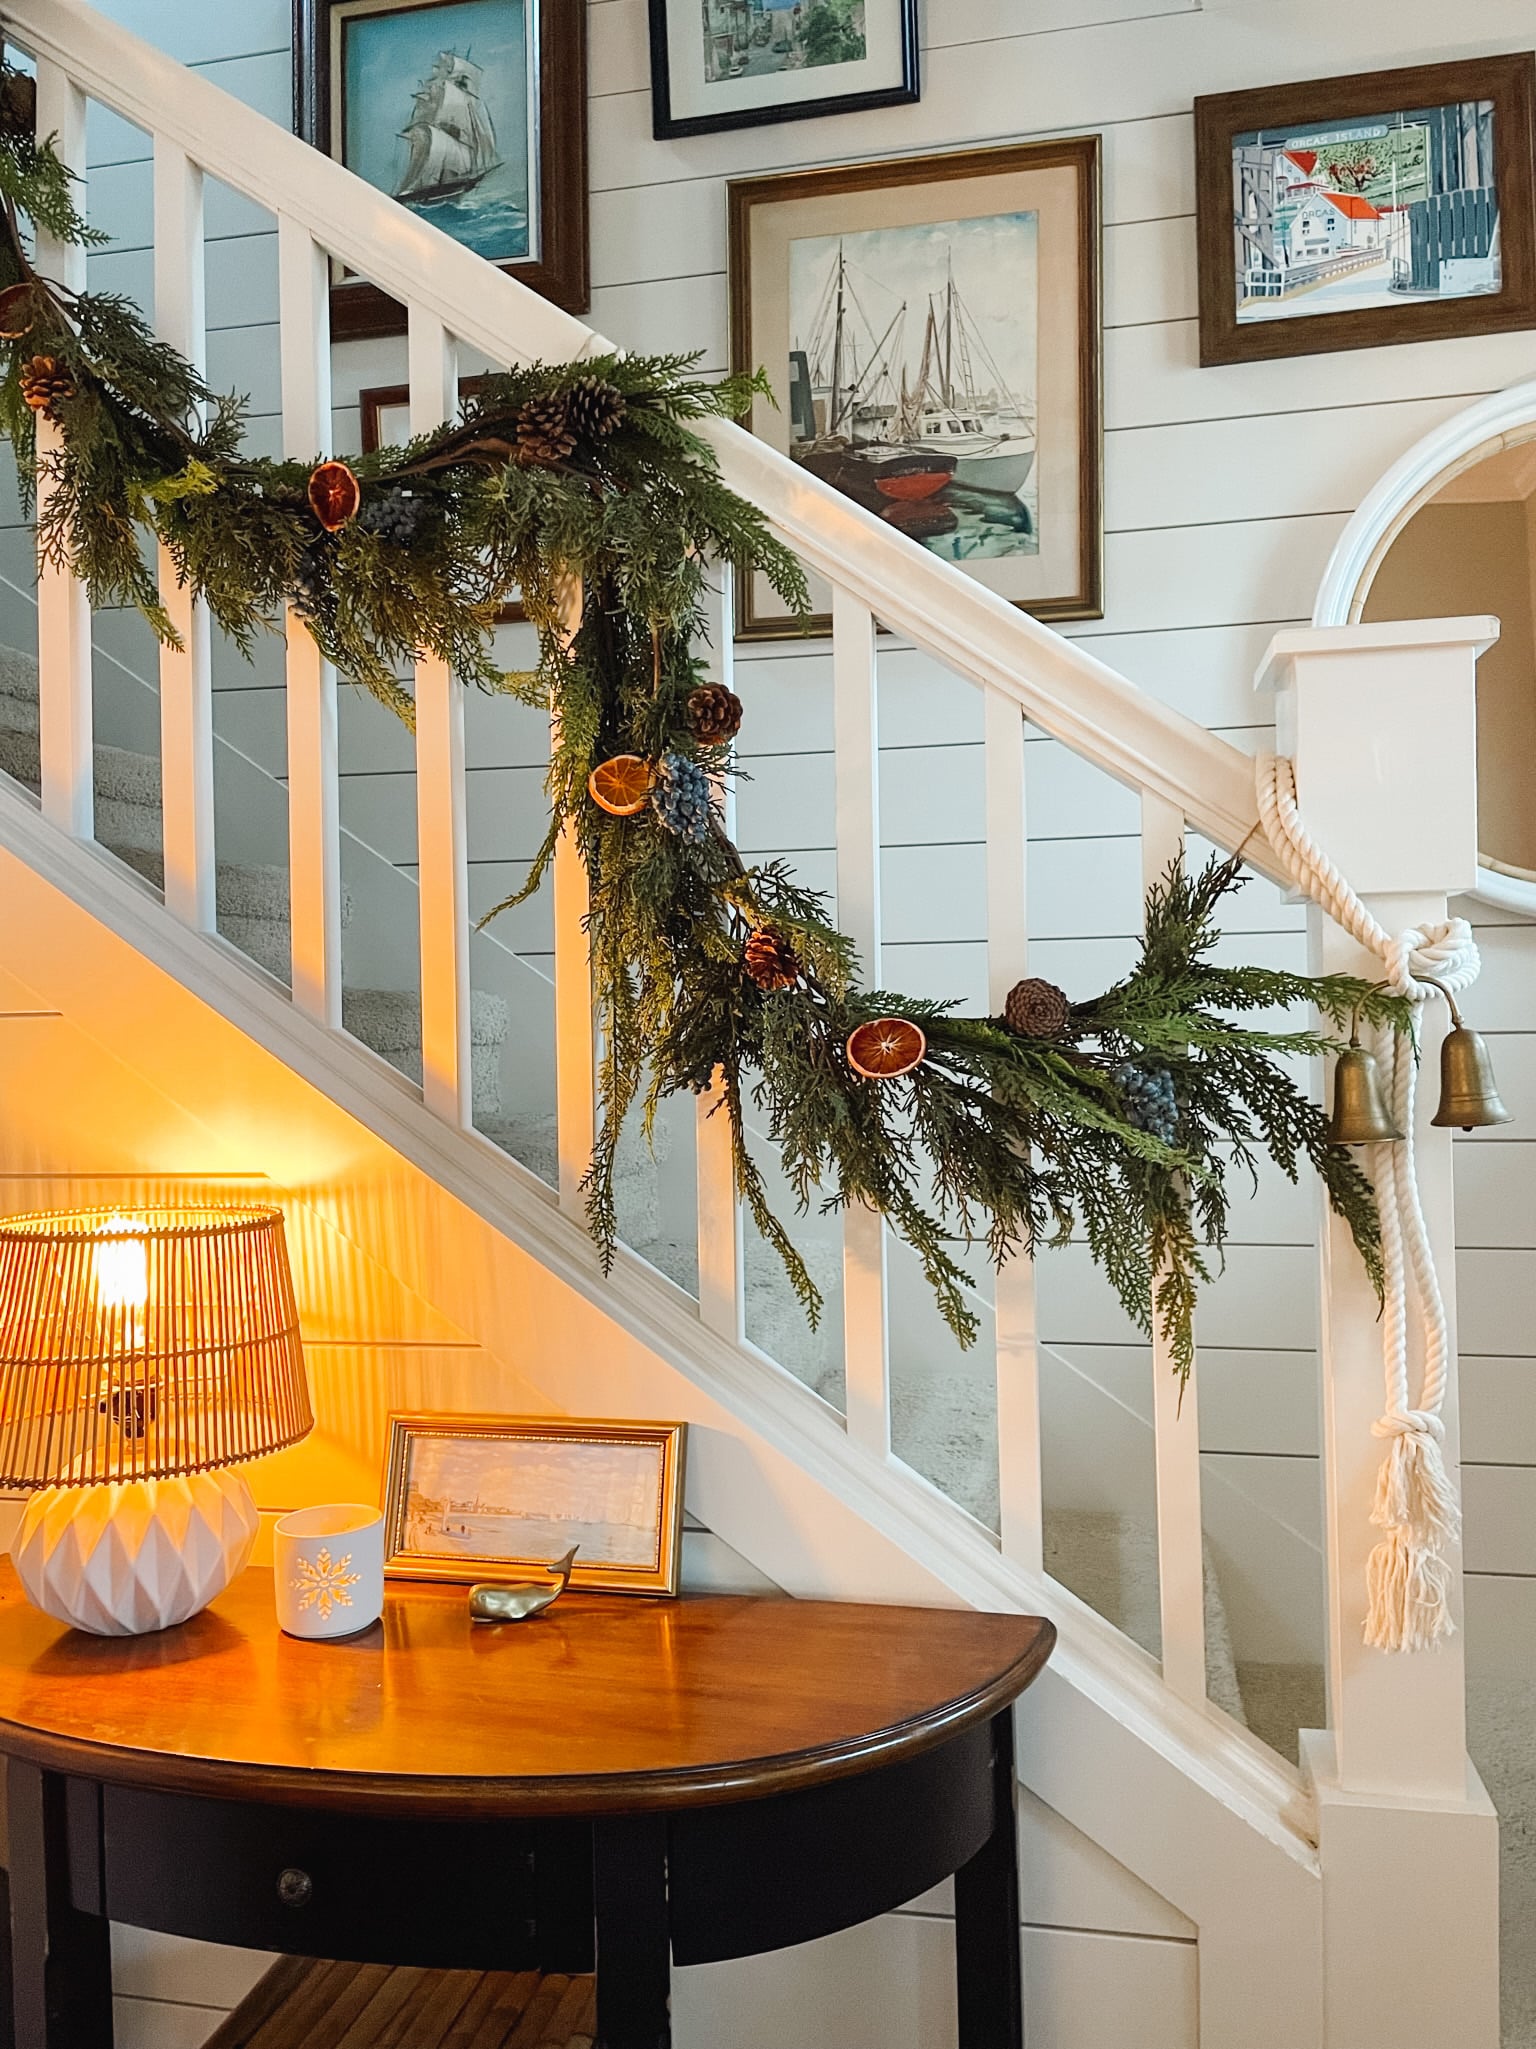 Christmas Lights Decorations to Brighten Up Your Holiday! | Christmas  Celebrations | Christmas garland on stairs, Christmas staircase, Christmas  garland